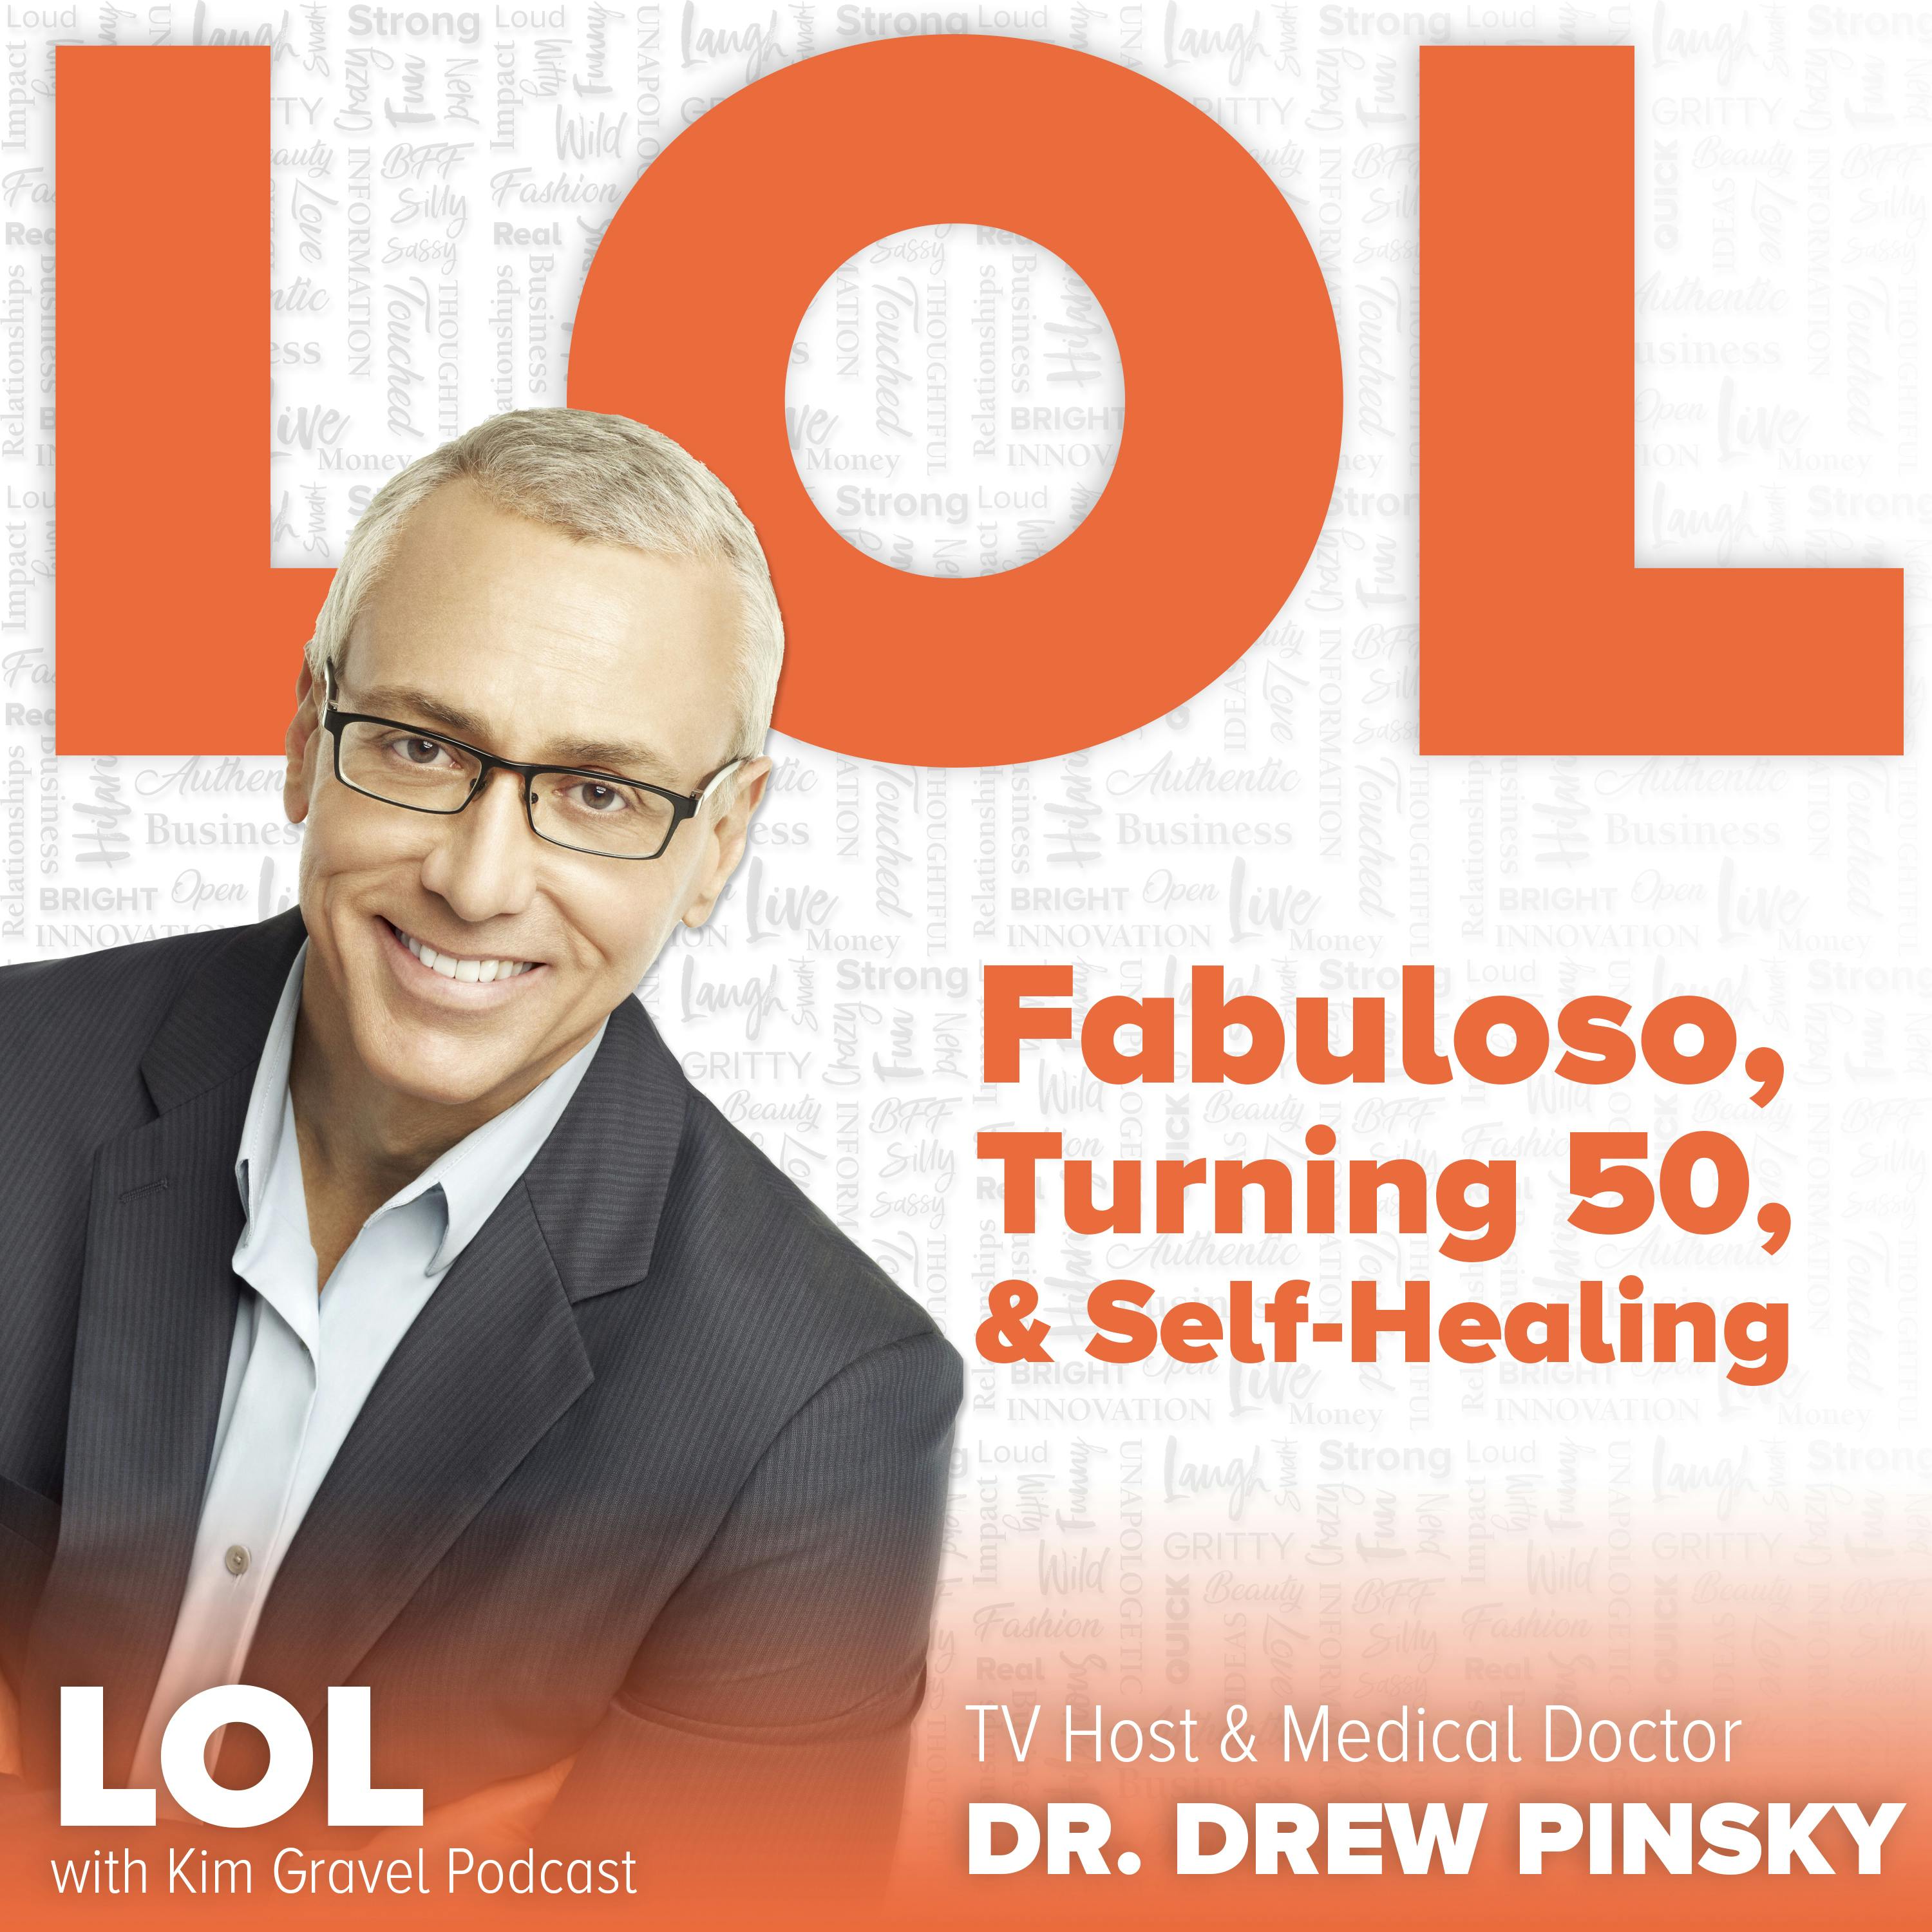 Fabuloso, Turning 50 and Self-Healing with Dr. Drew